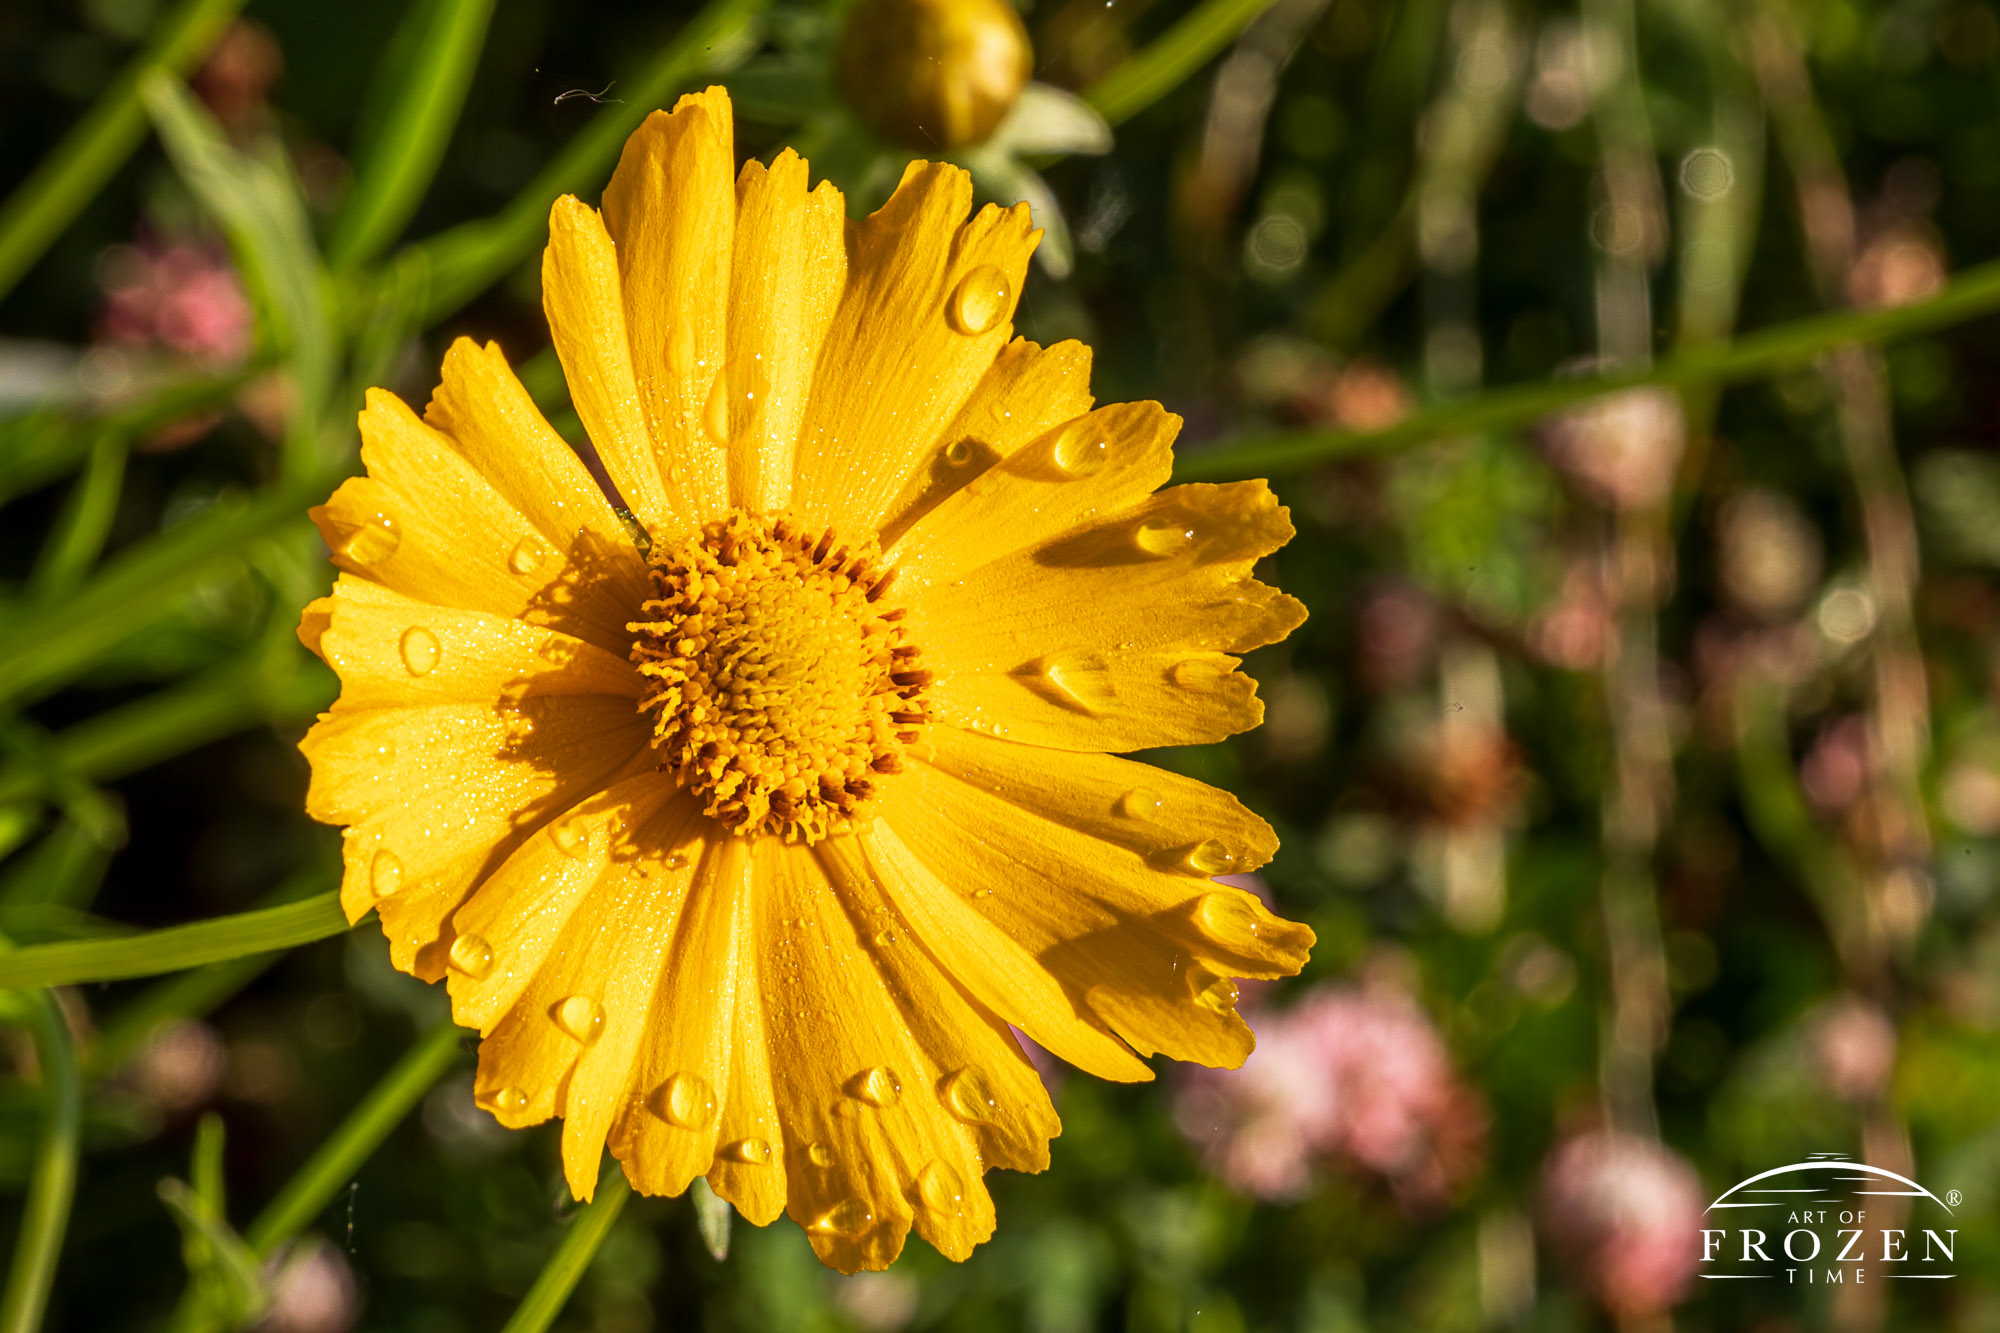 A close up of a Lance-leaf Coreopsis (Coreopsis lanceolata) drenched in morning dew as the bright sun illuminates it yellow petals